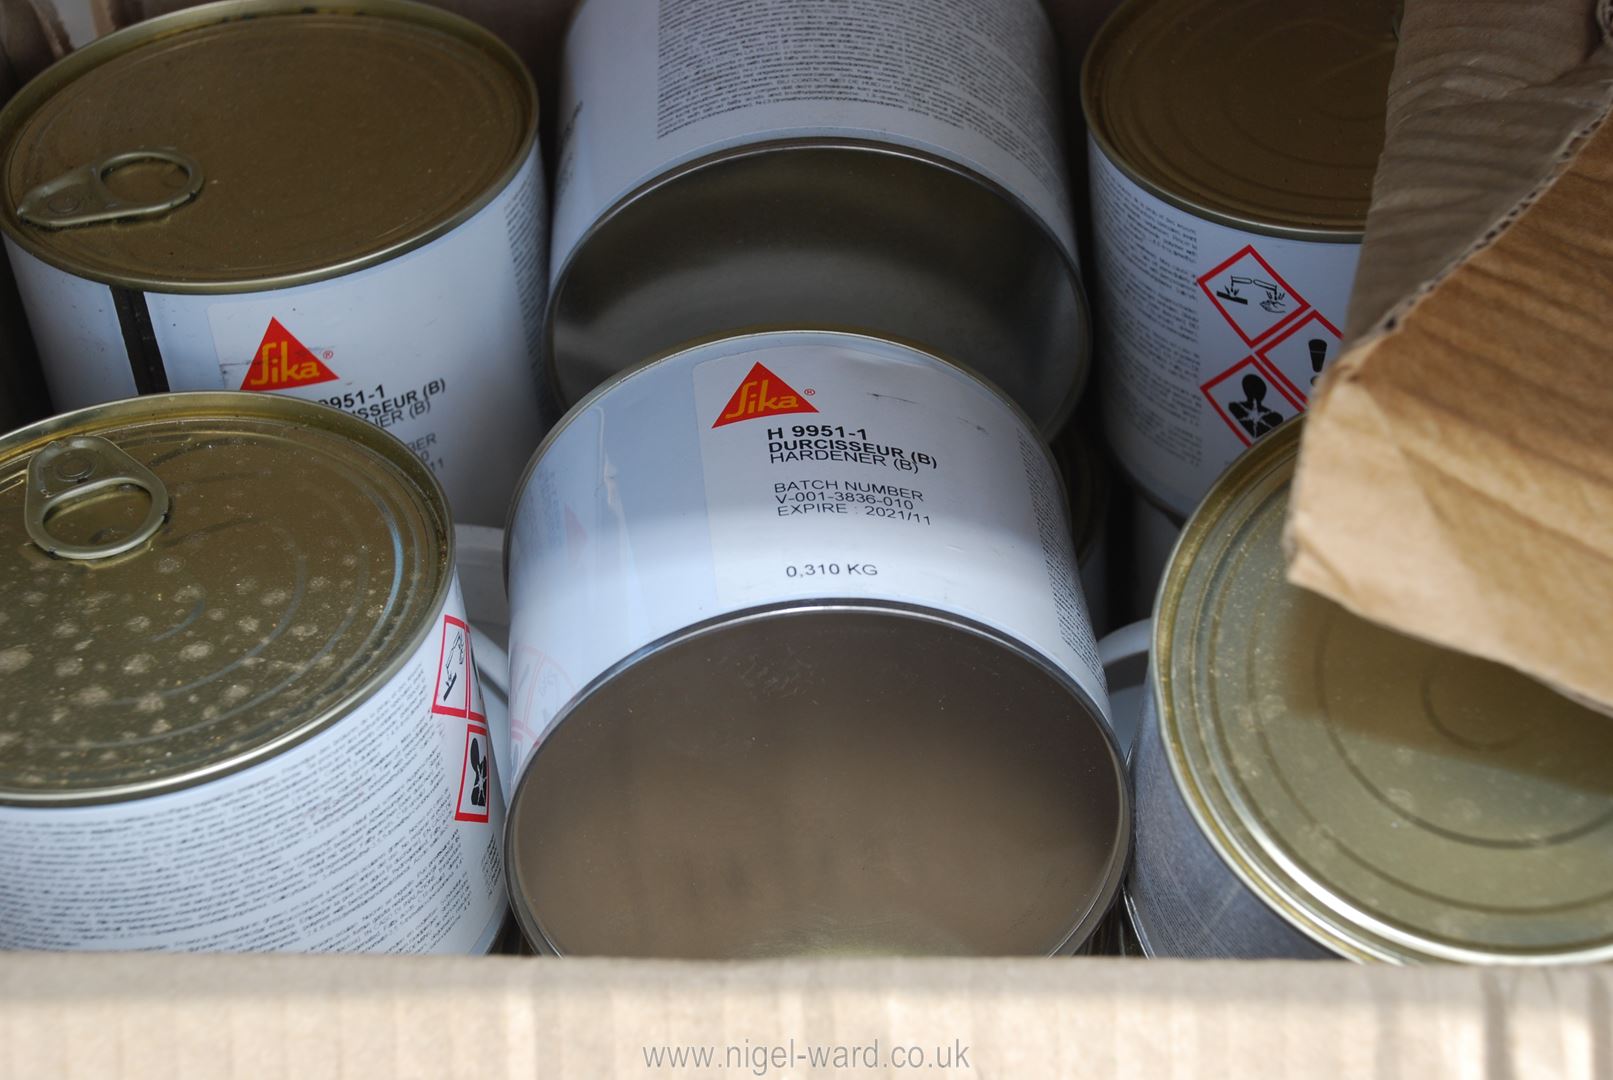 A quantity of 'Sika' Sikalastic, Sikacor, mastic wall tile filler, etc. - Image 3 of 11